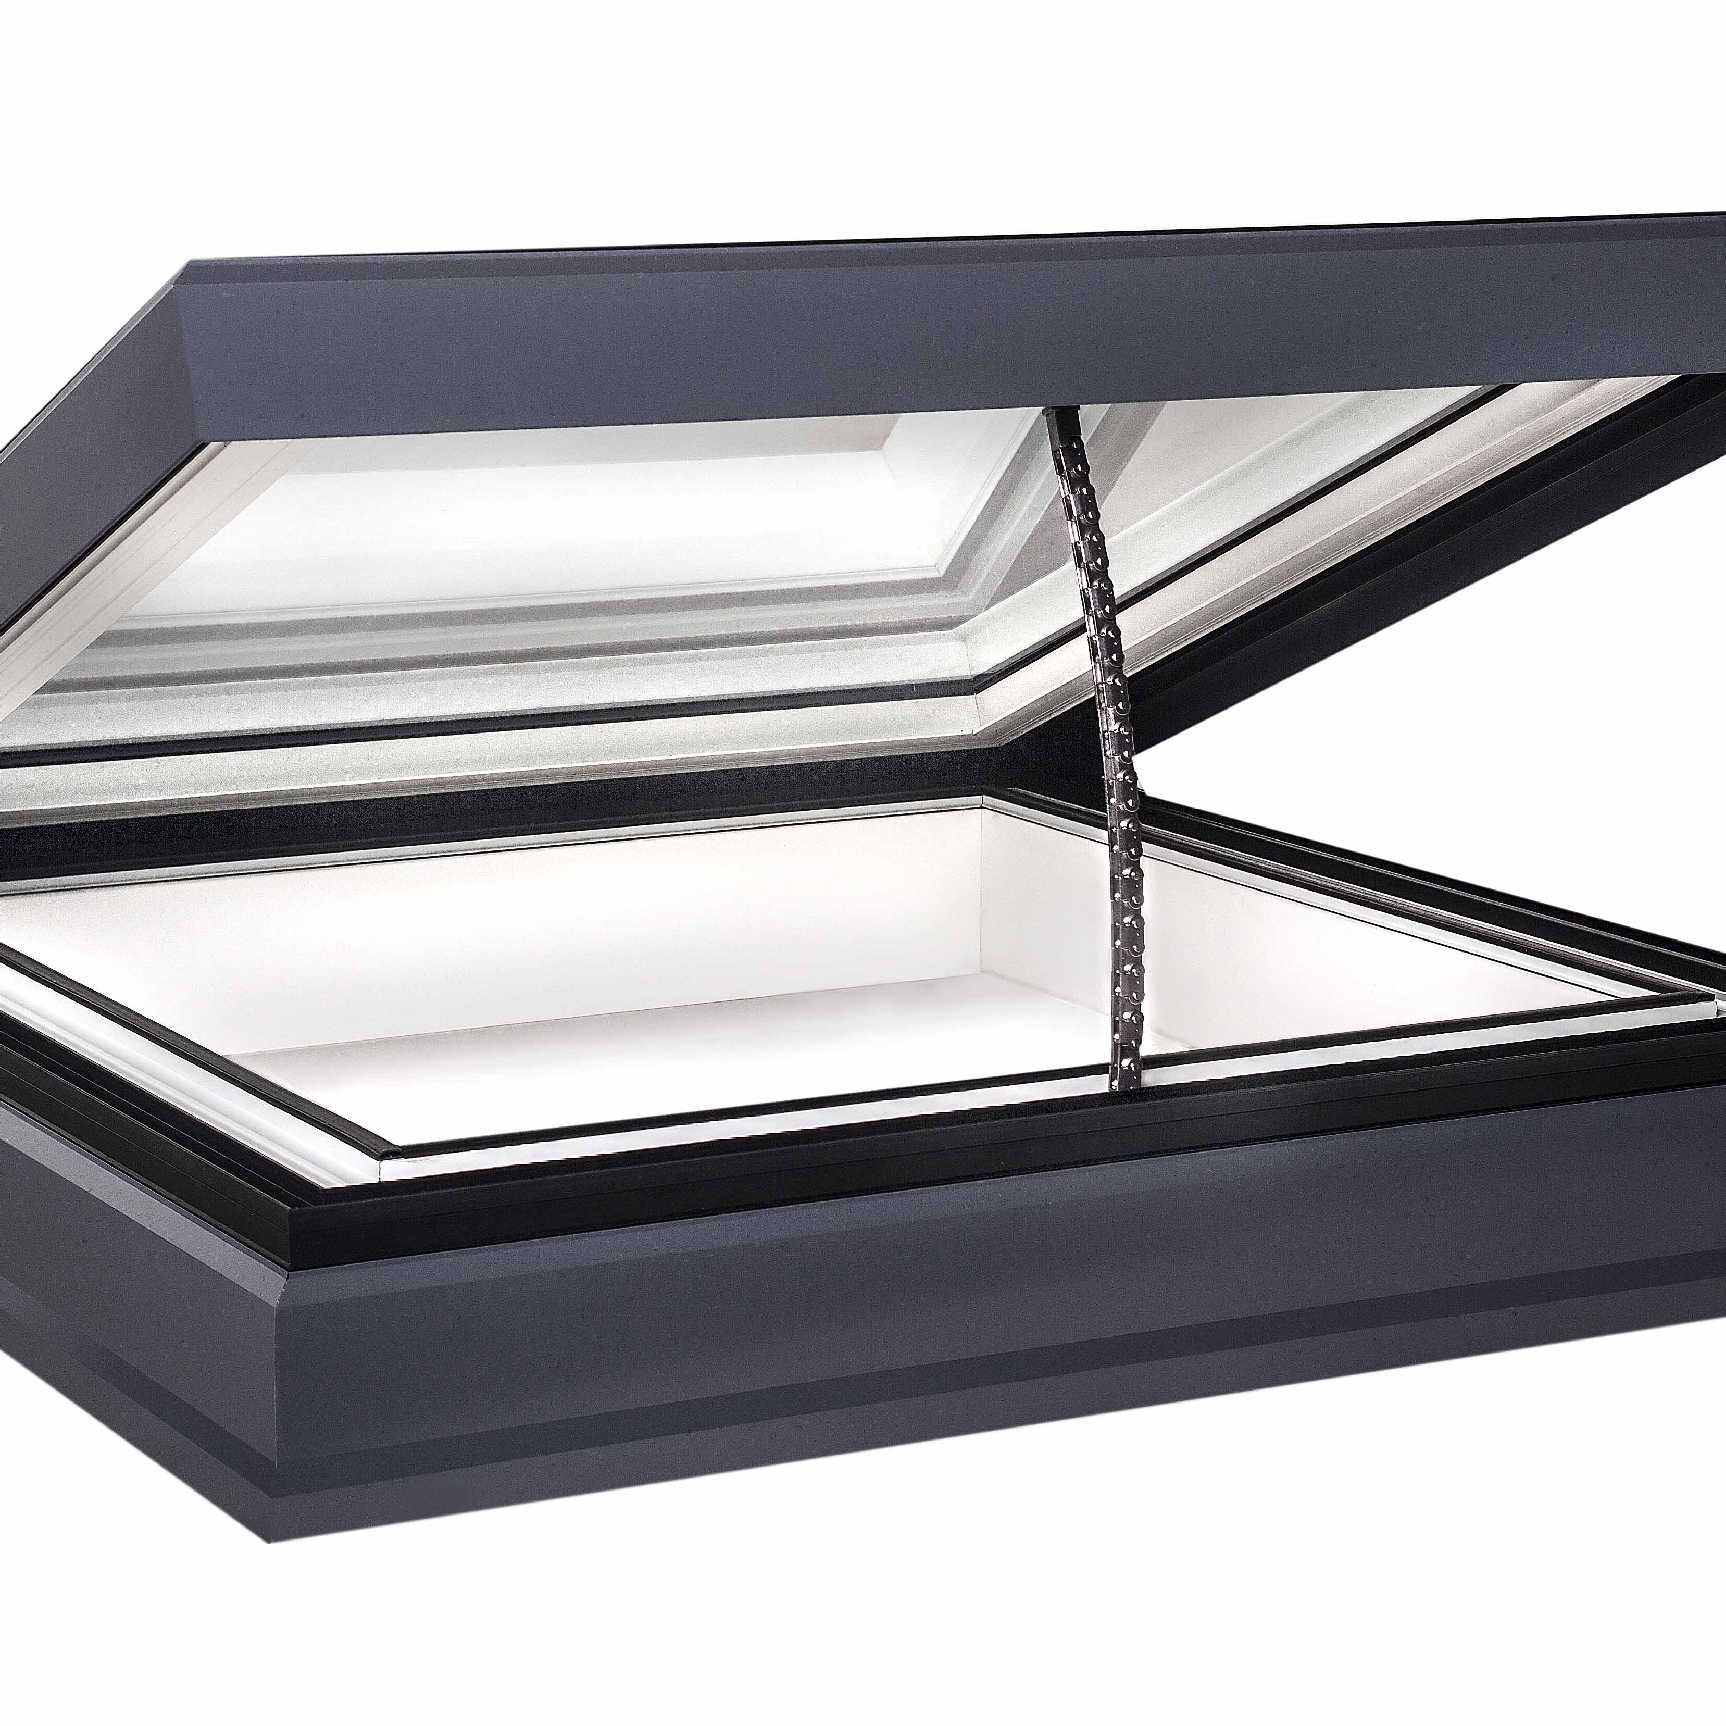 Affordable EcoGard Flat Roof light, Double Glazed, Electric Opening, 1,000mm x 1,500mm